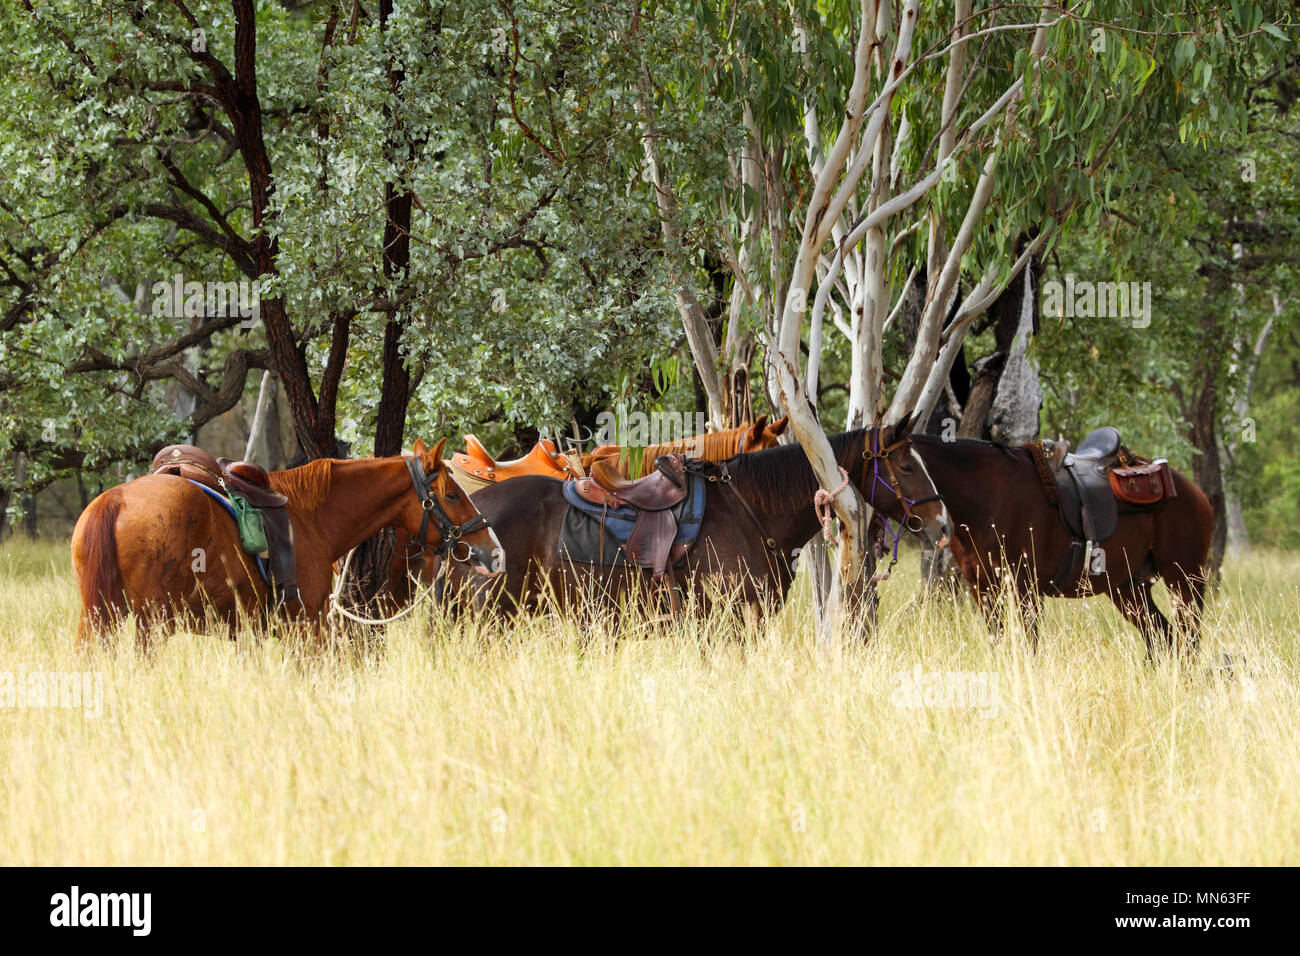 Horses tied up and resting under a tree. Stock Photo